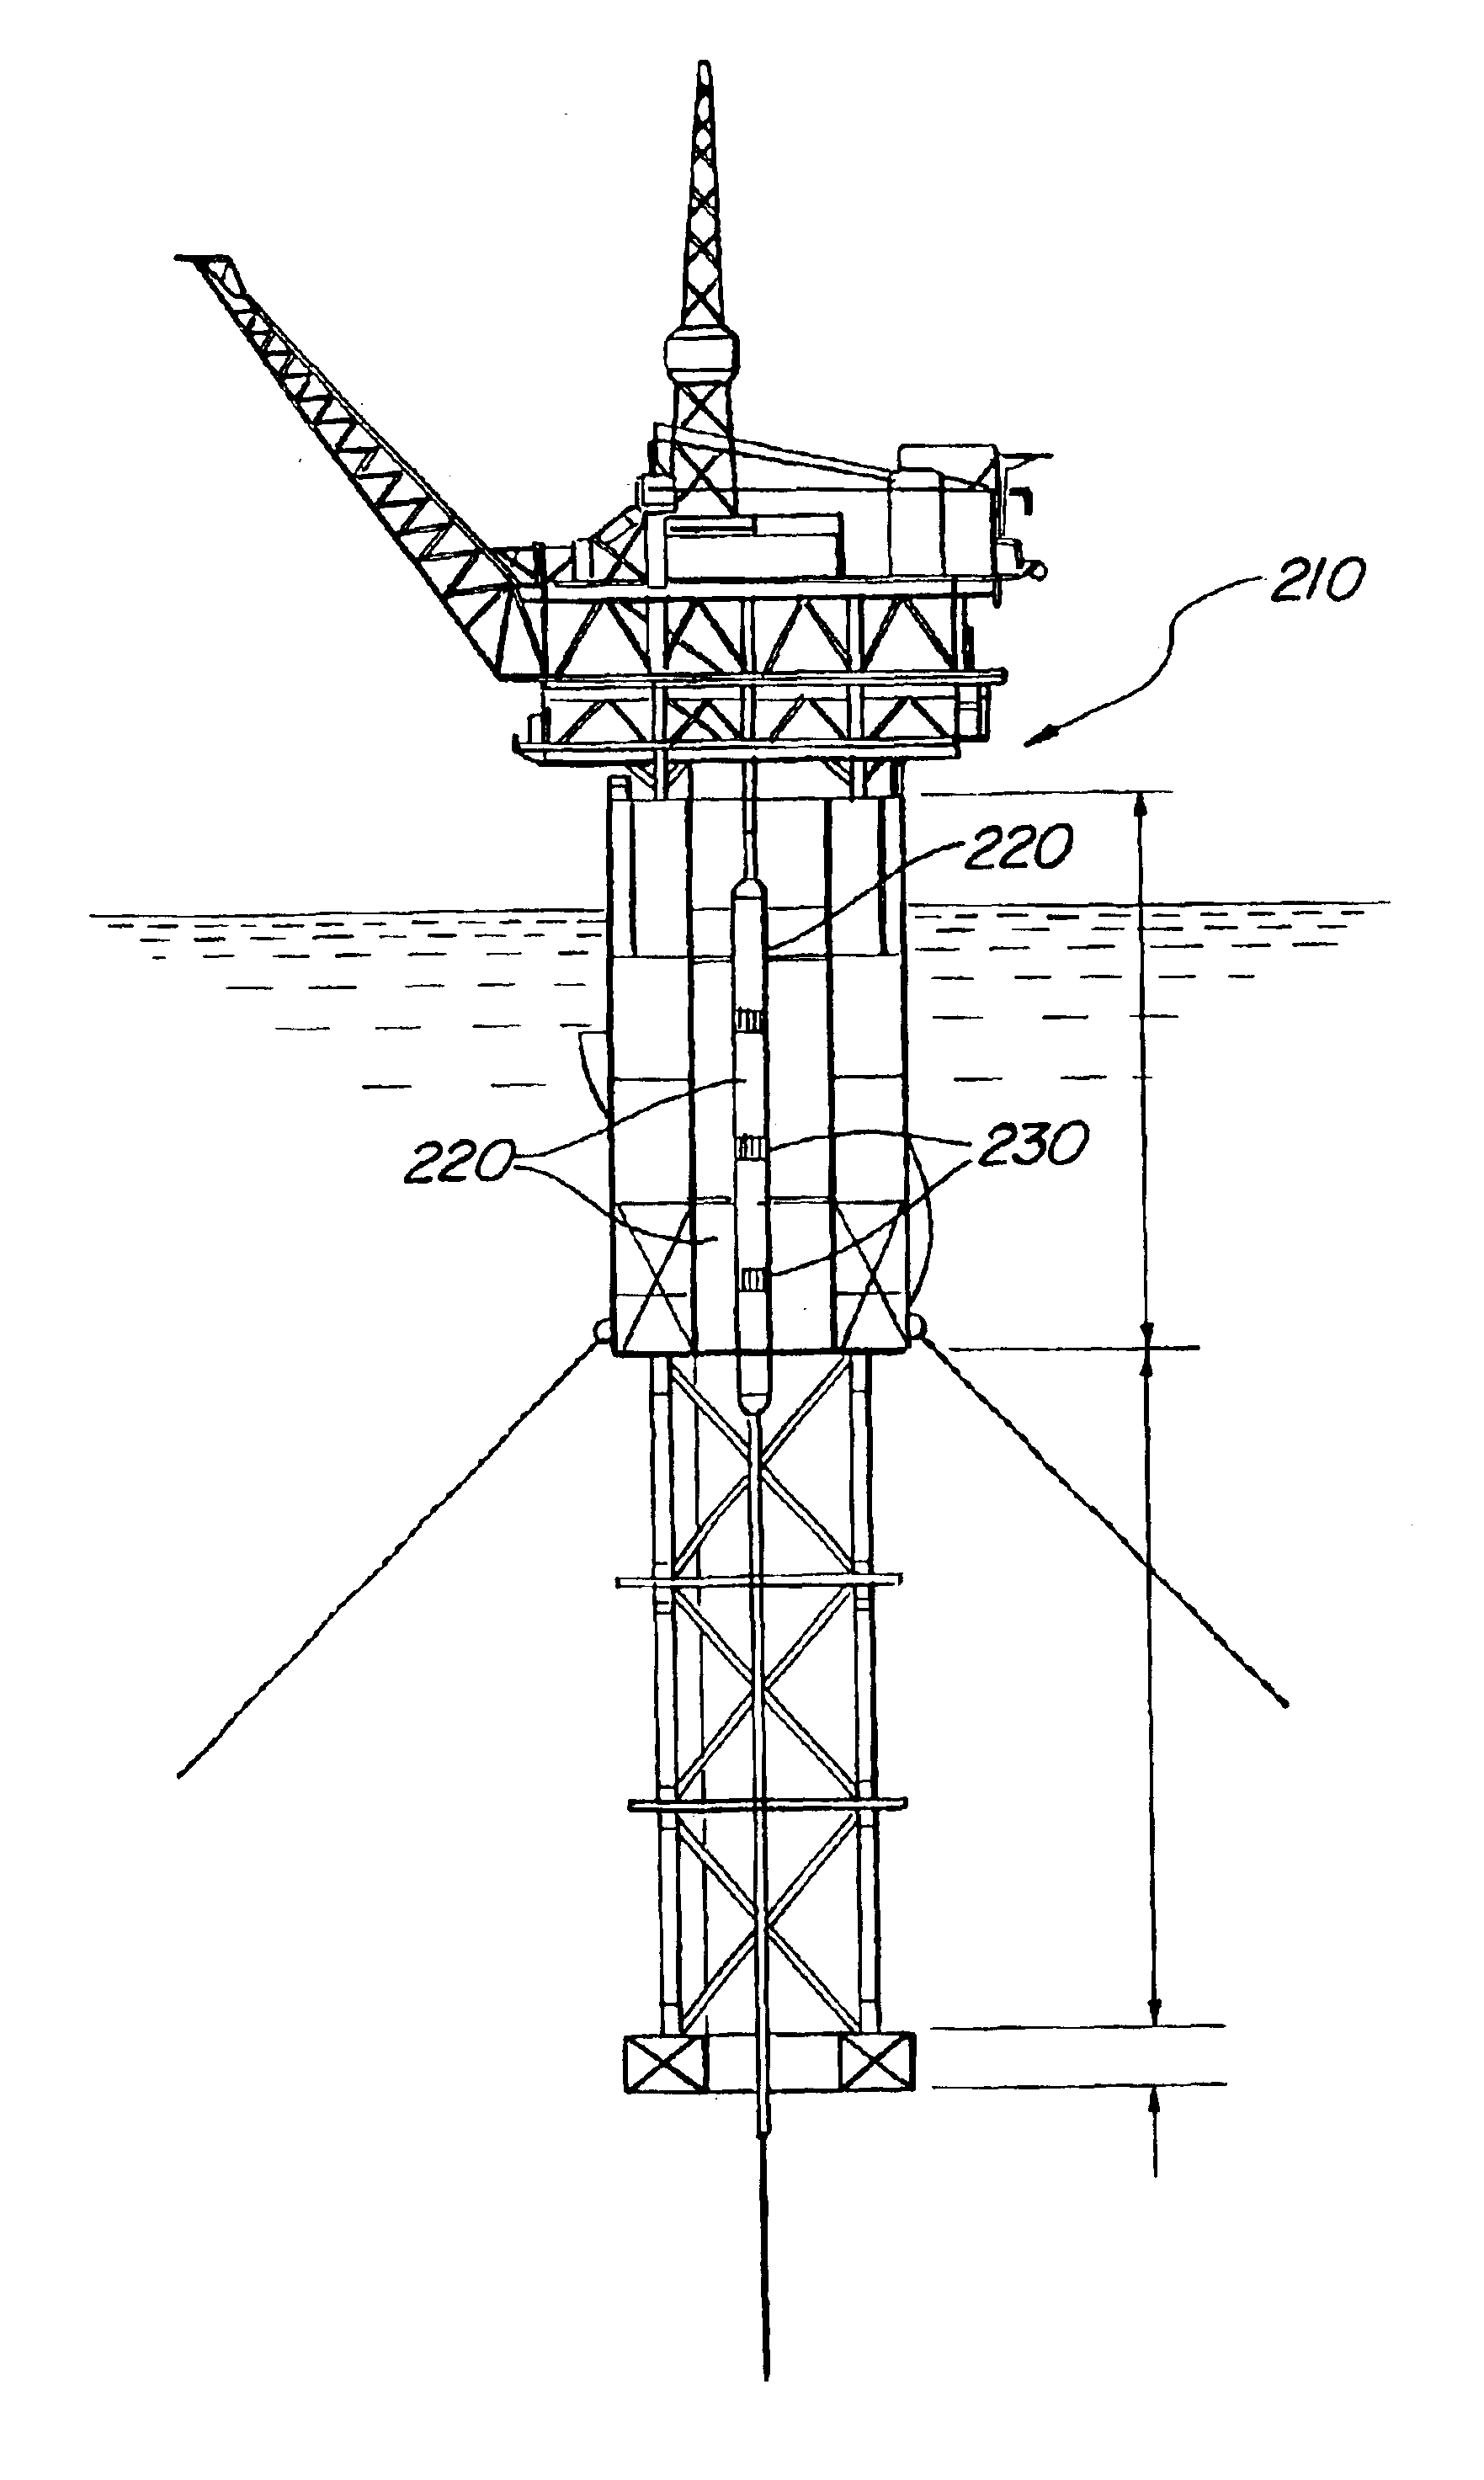 Engineered material buoyancy system and device